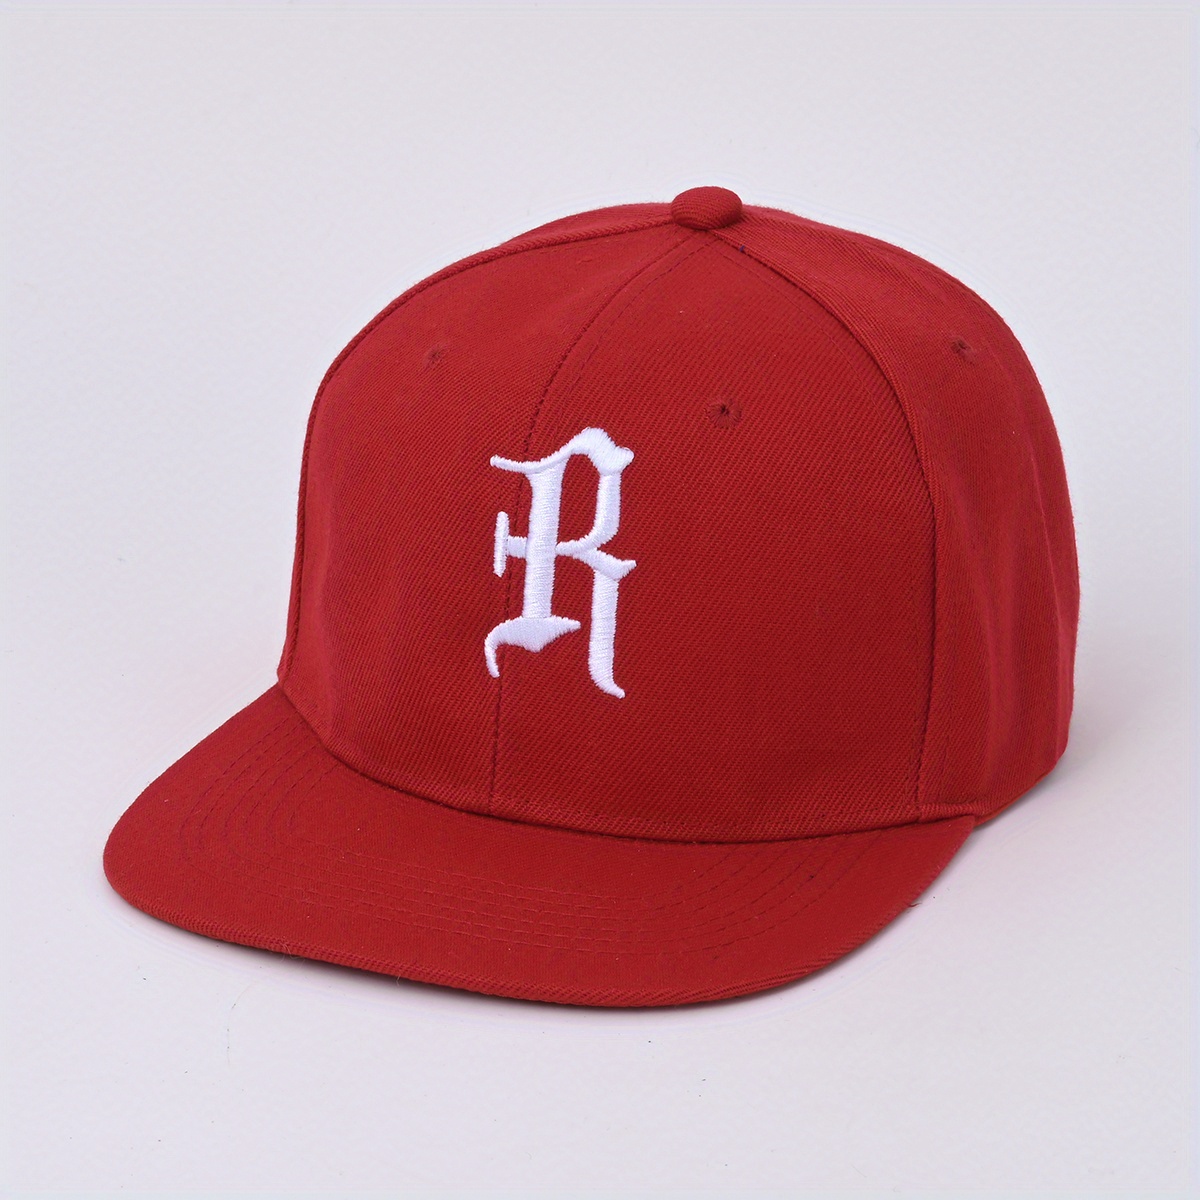 Red Wolf Eagle 3D Embroidered Snapback Rhude Baseball Cap Casual Fitted Hat  For Men And Women From Qiuti18, $10.2